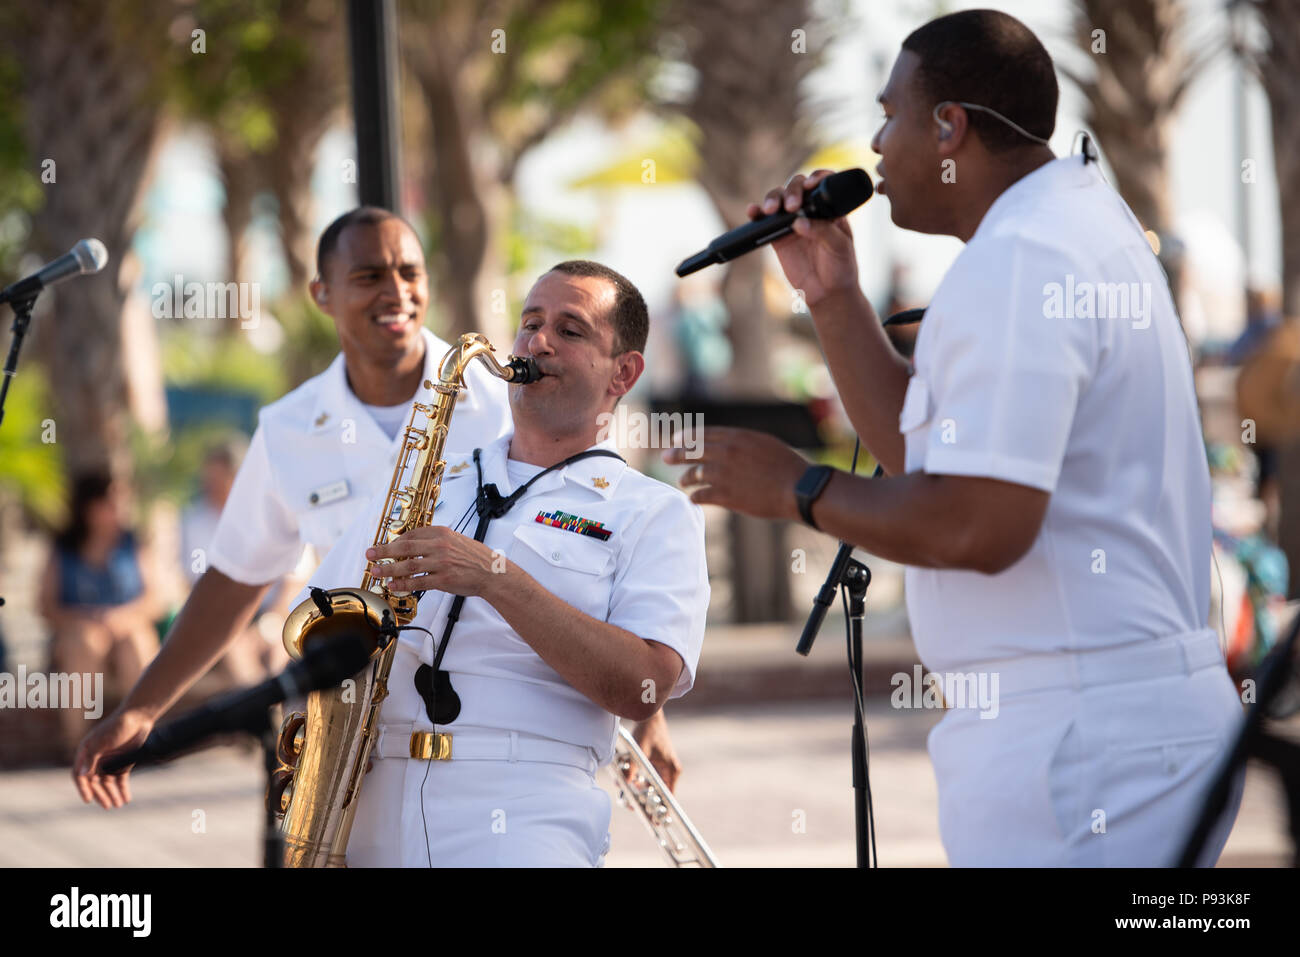 KEY WEST, Fla. (July 9, 2018) Musicians 1st Class David Smith, left, Manuel Pelayo de Gongora, center, and Cory Parker, right, perform with the U.S. Navy Band Cruisers popular music group during a concert at Mallory Square in Key West, Fla. The Navy Band performed in seven cities in Florida, connecting communities to the Navy and building awareness and support for the Navy. (U.S. Navy photo by Senior Chief Musician Adam Grimm/Released) Stock Photo